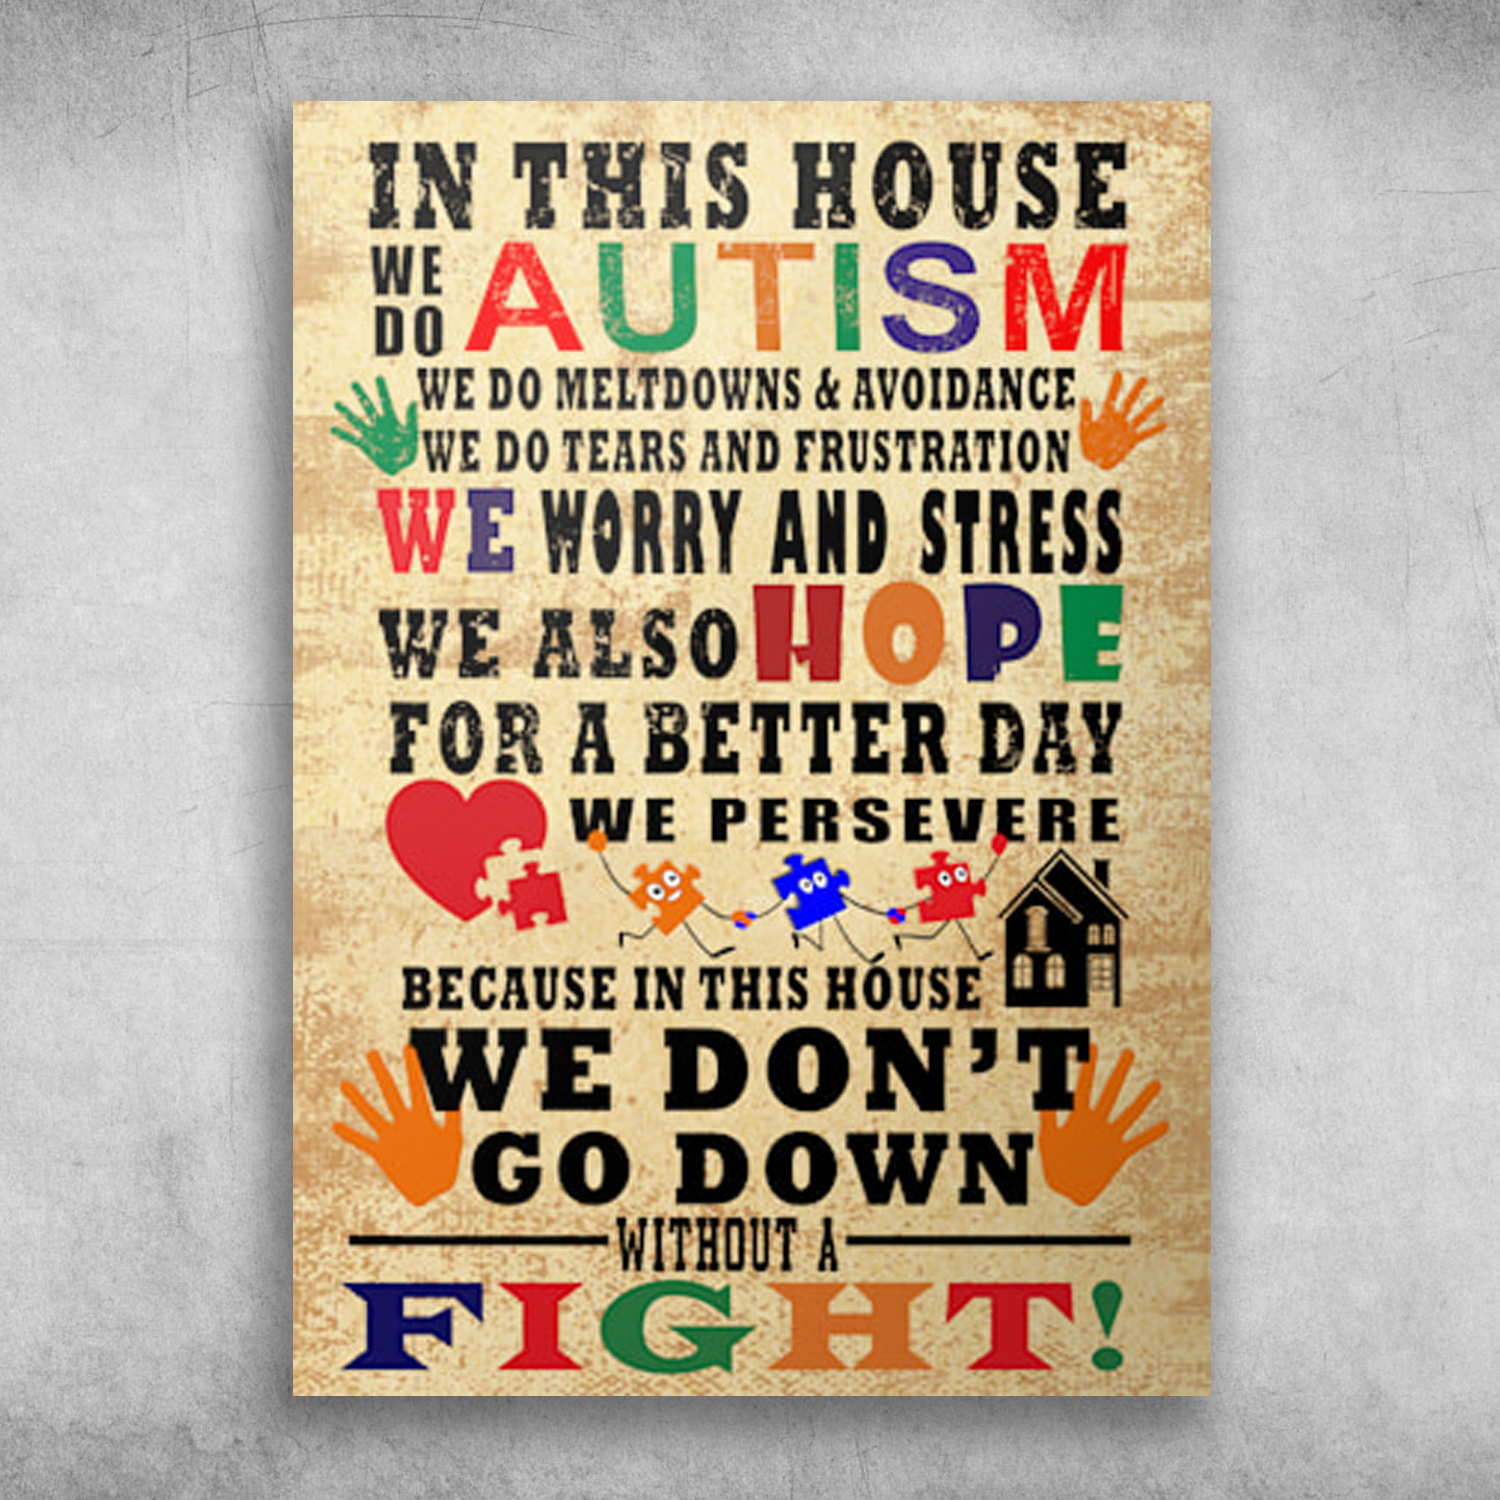 In This House We Do Autism We Also Hope For A Better Day